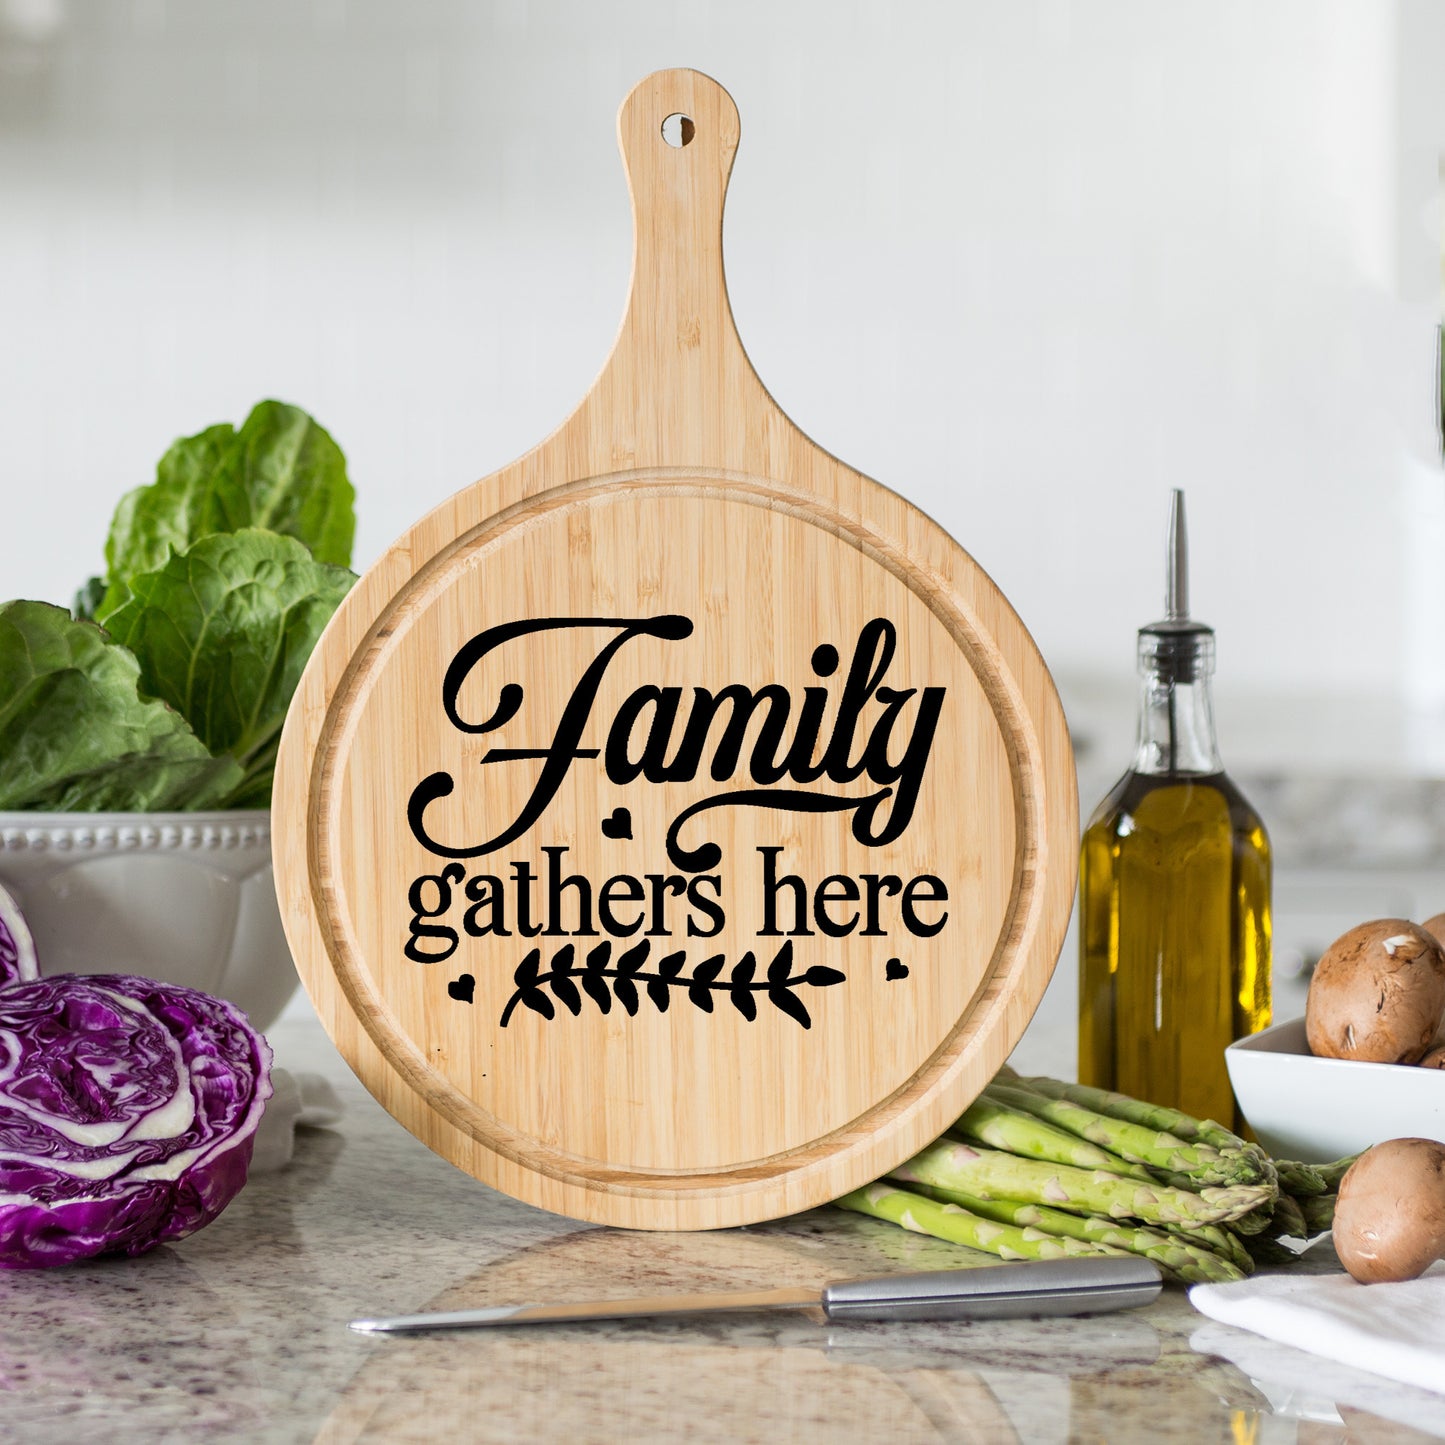 Family gathers here- FREE SHIPPING